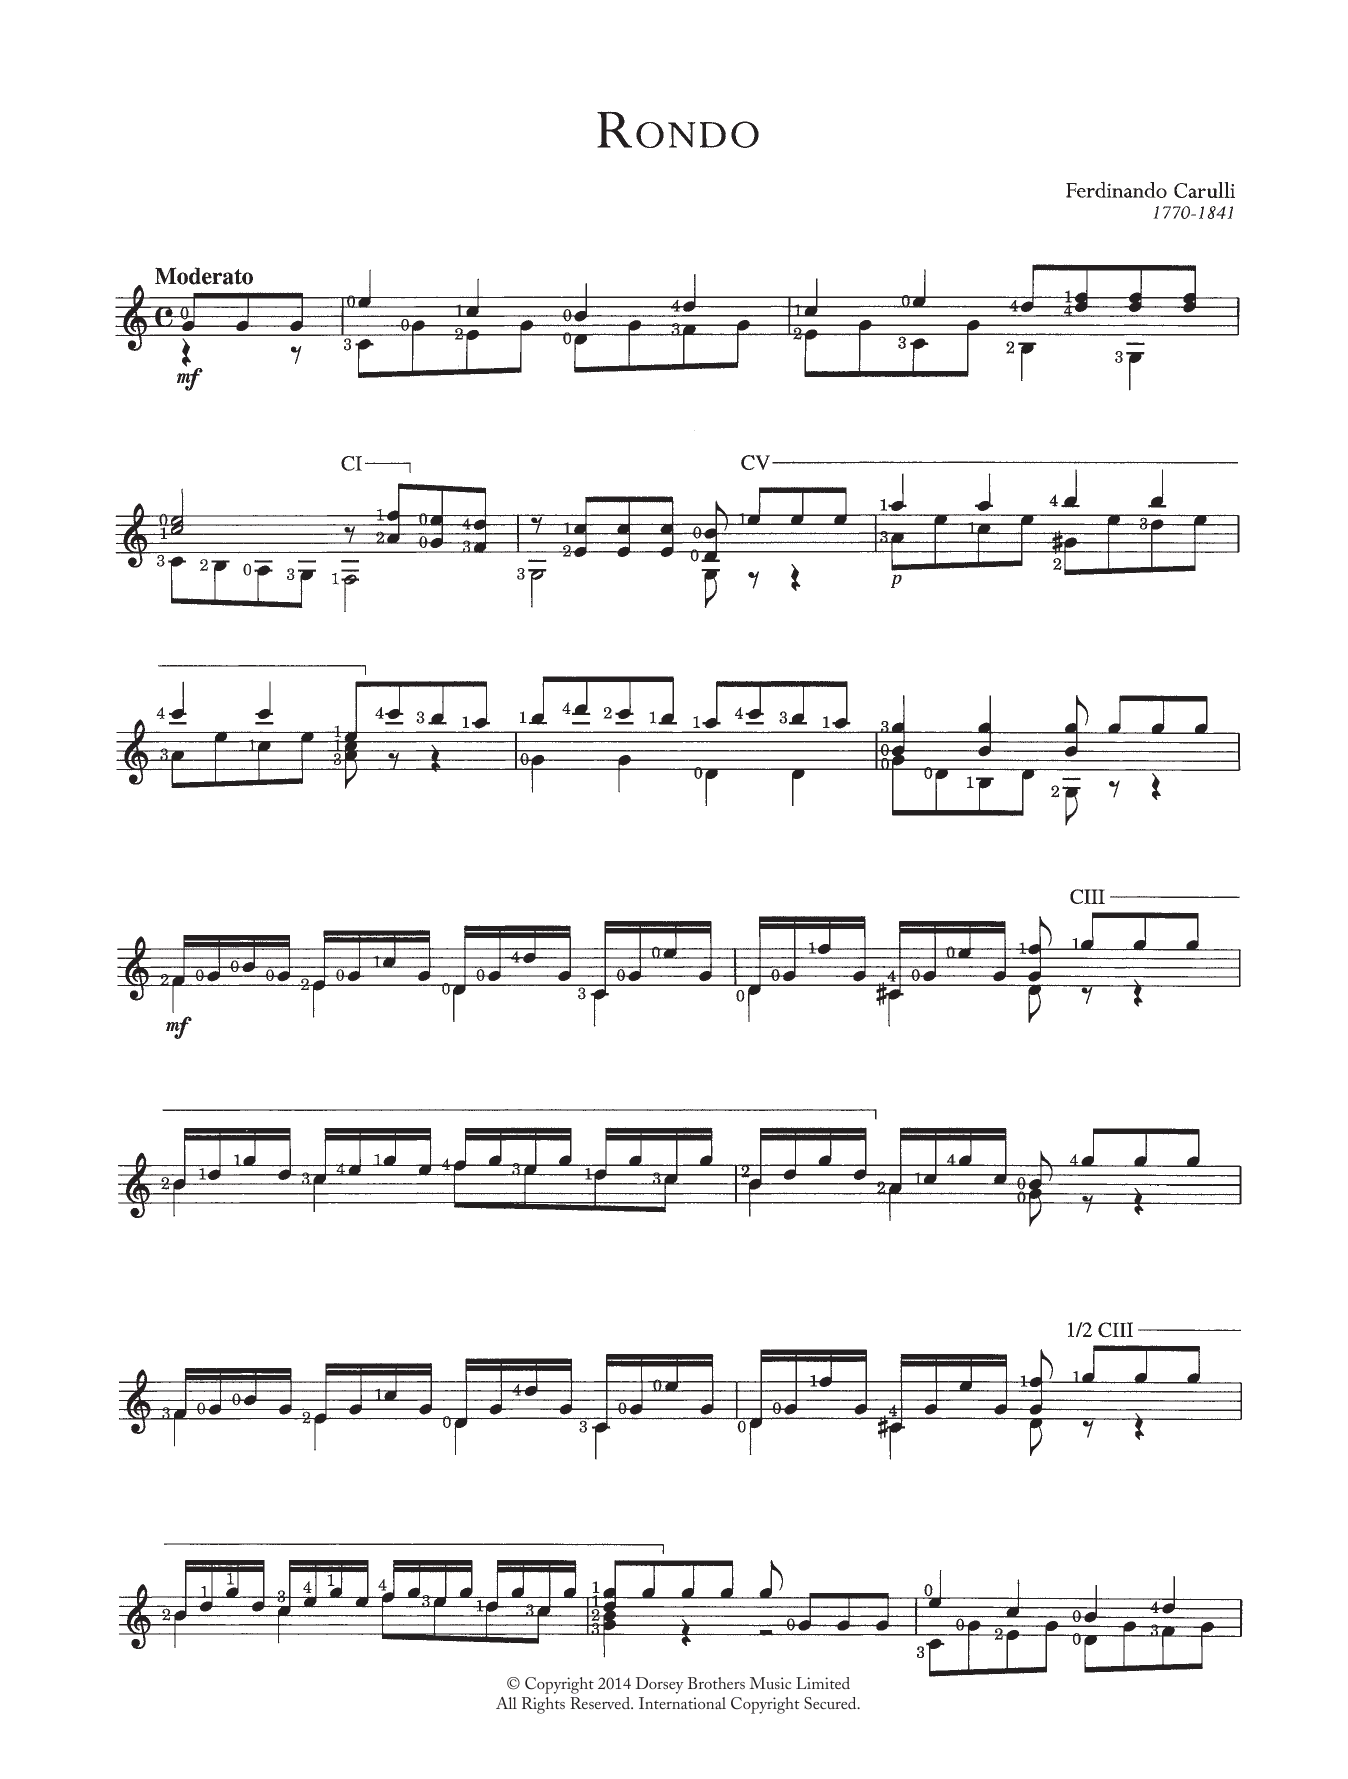 Ferdinando Carulli Rondo sheet music preview music notes and score for Guitar including 3 page(s)